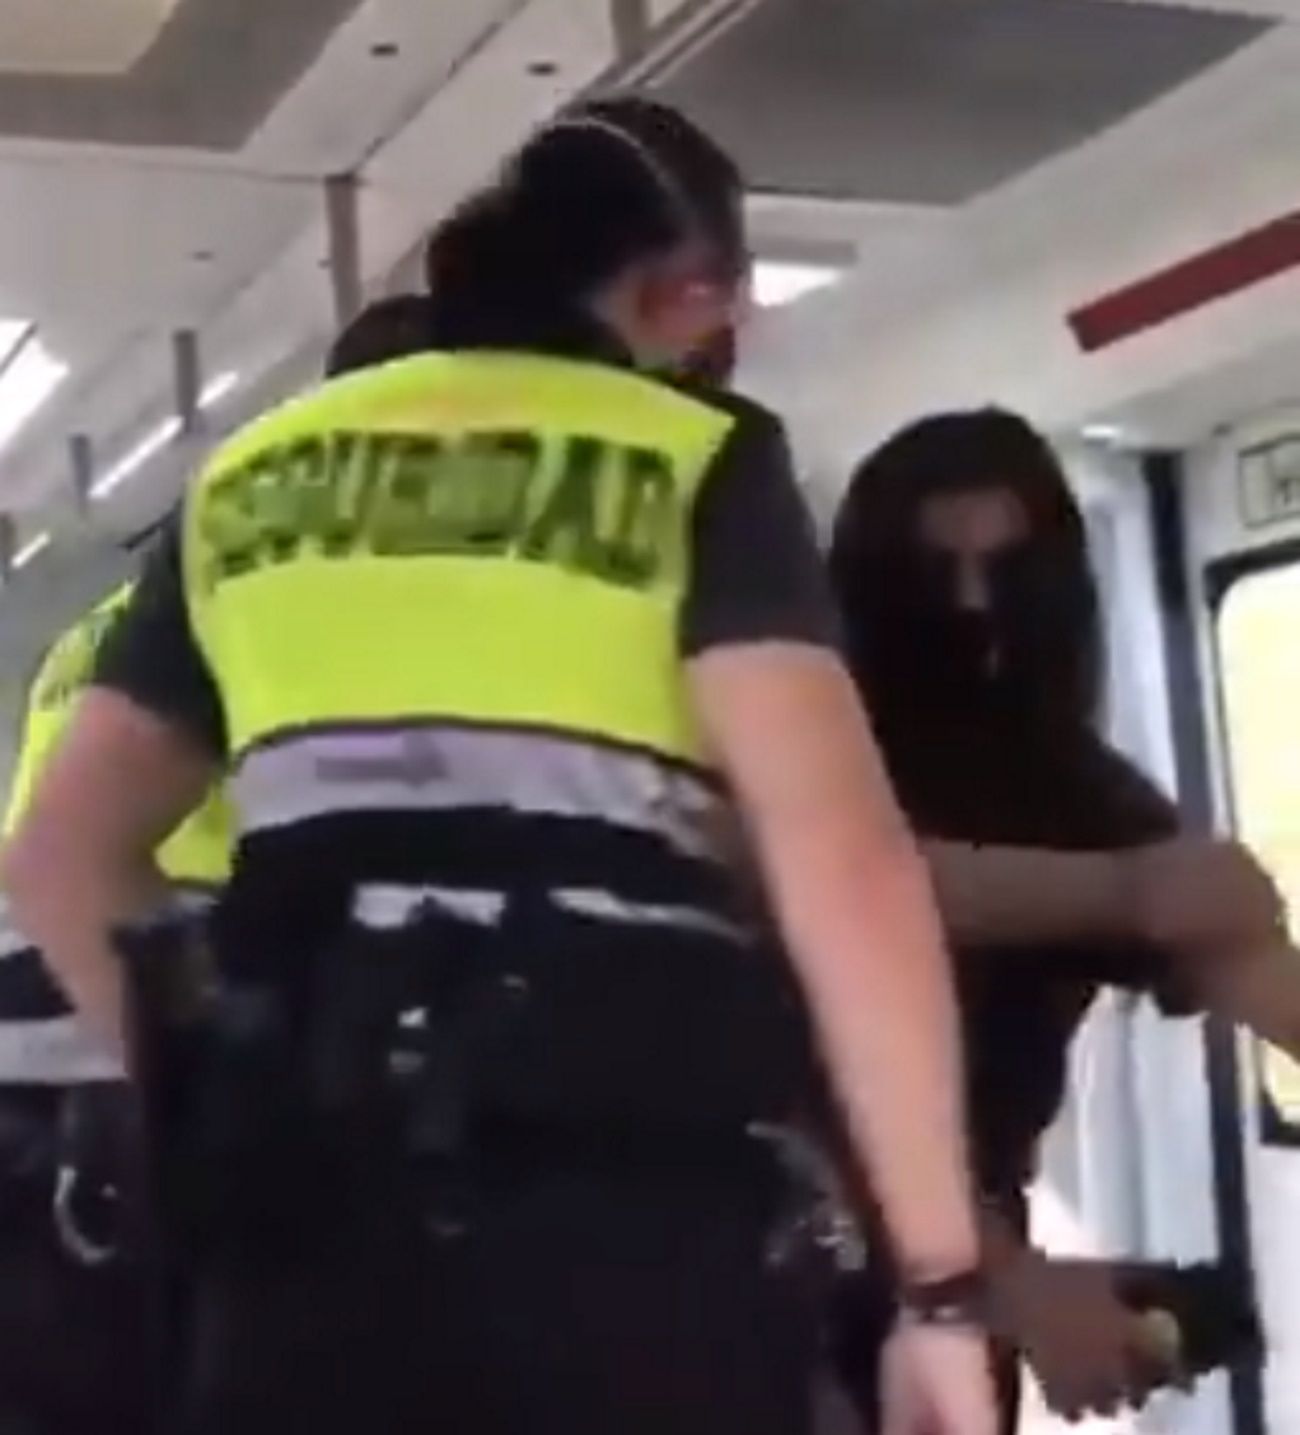 VIDEO | Rail employees harass woman for speaking Catalan: "We're in Spain"